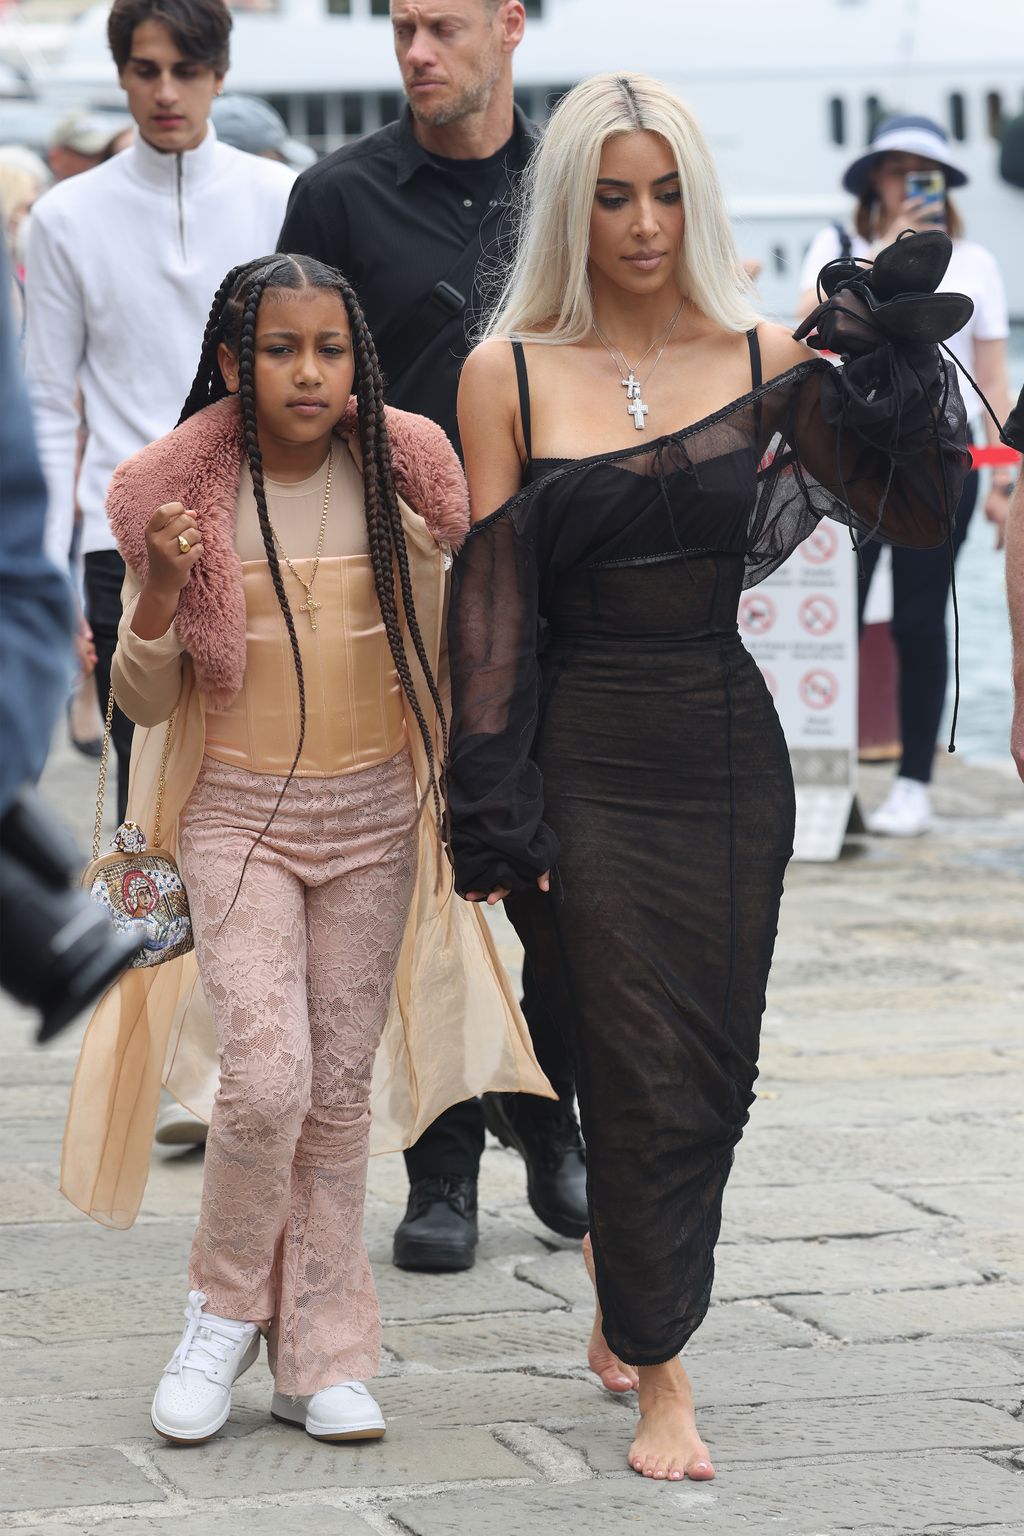 North West is 10! Kim Kardashian and Kanye West's eldest child is now